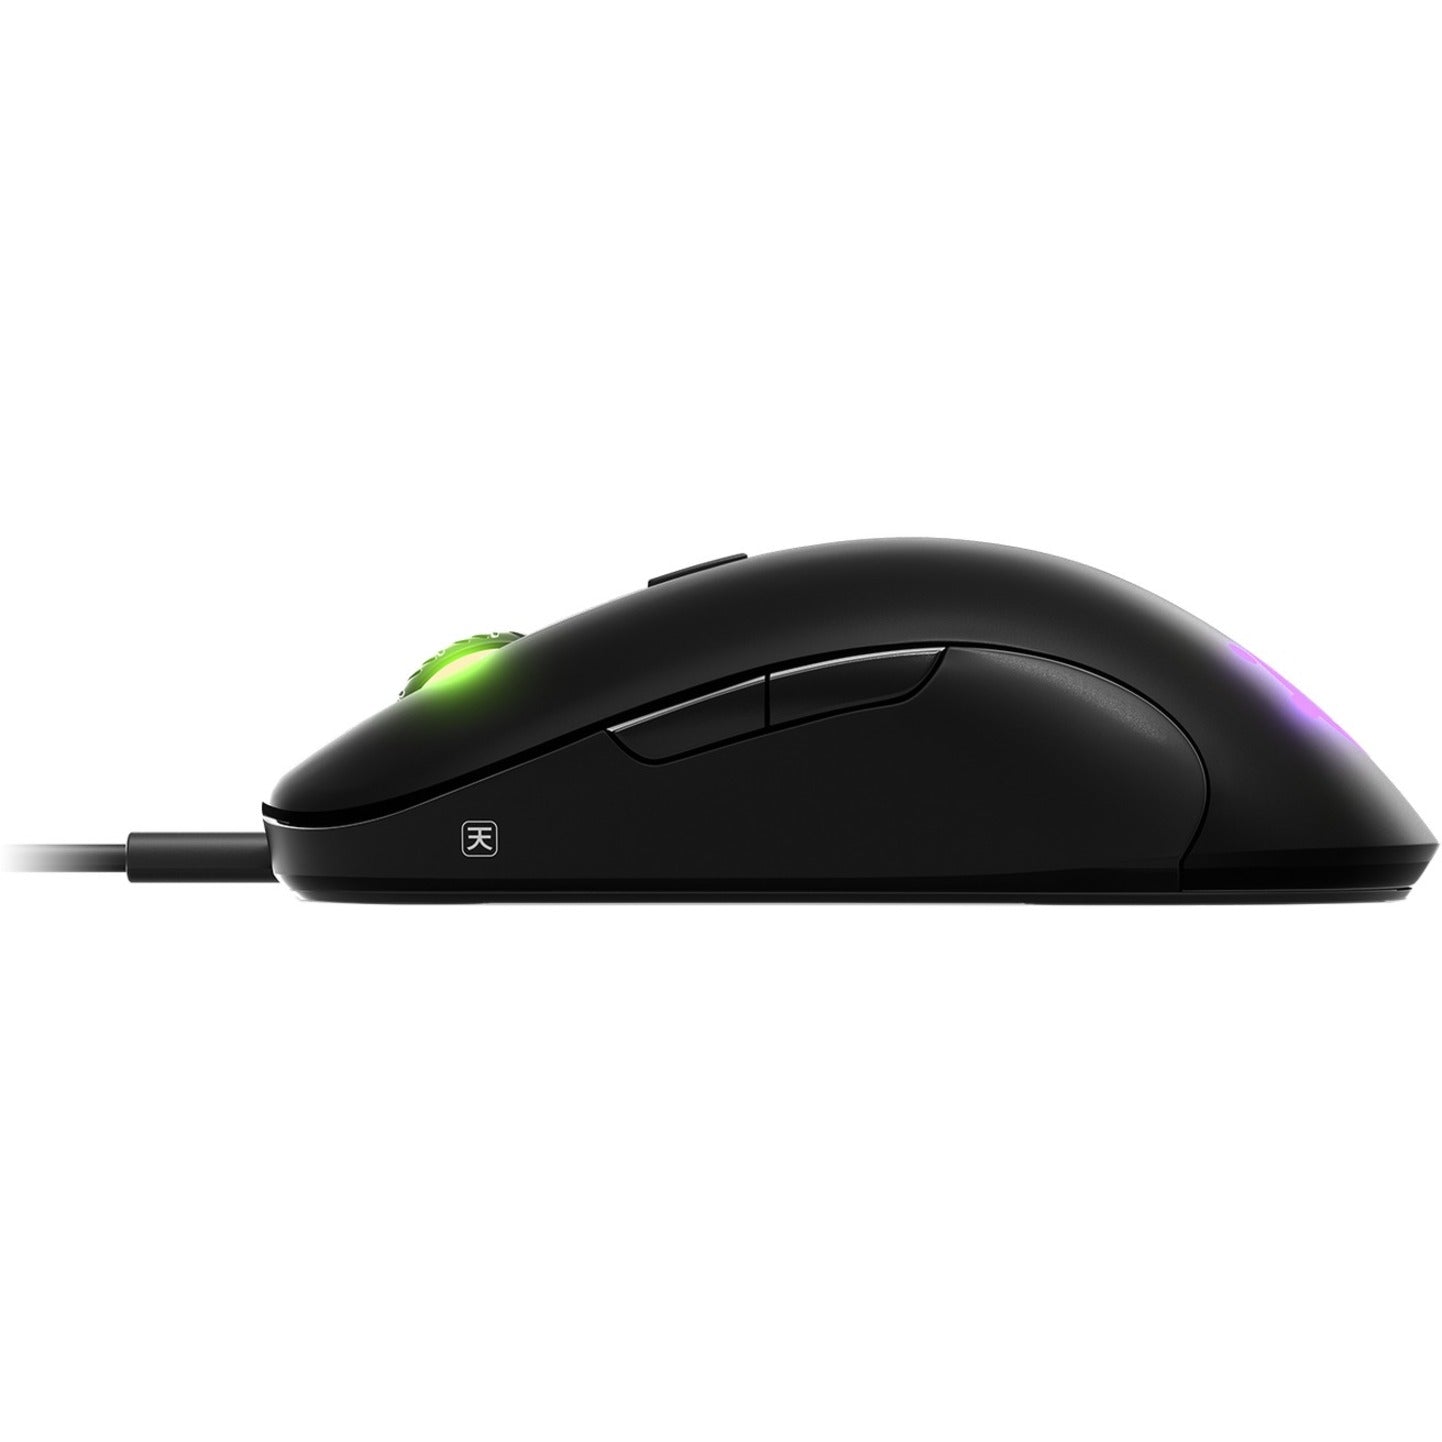 SteelSeries Sensei Ten Gaming Mouse - Ergonomic Fit, 18000 DPI, 8 Buttons [Discontinued]